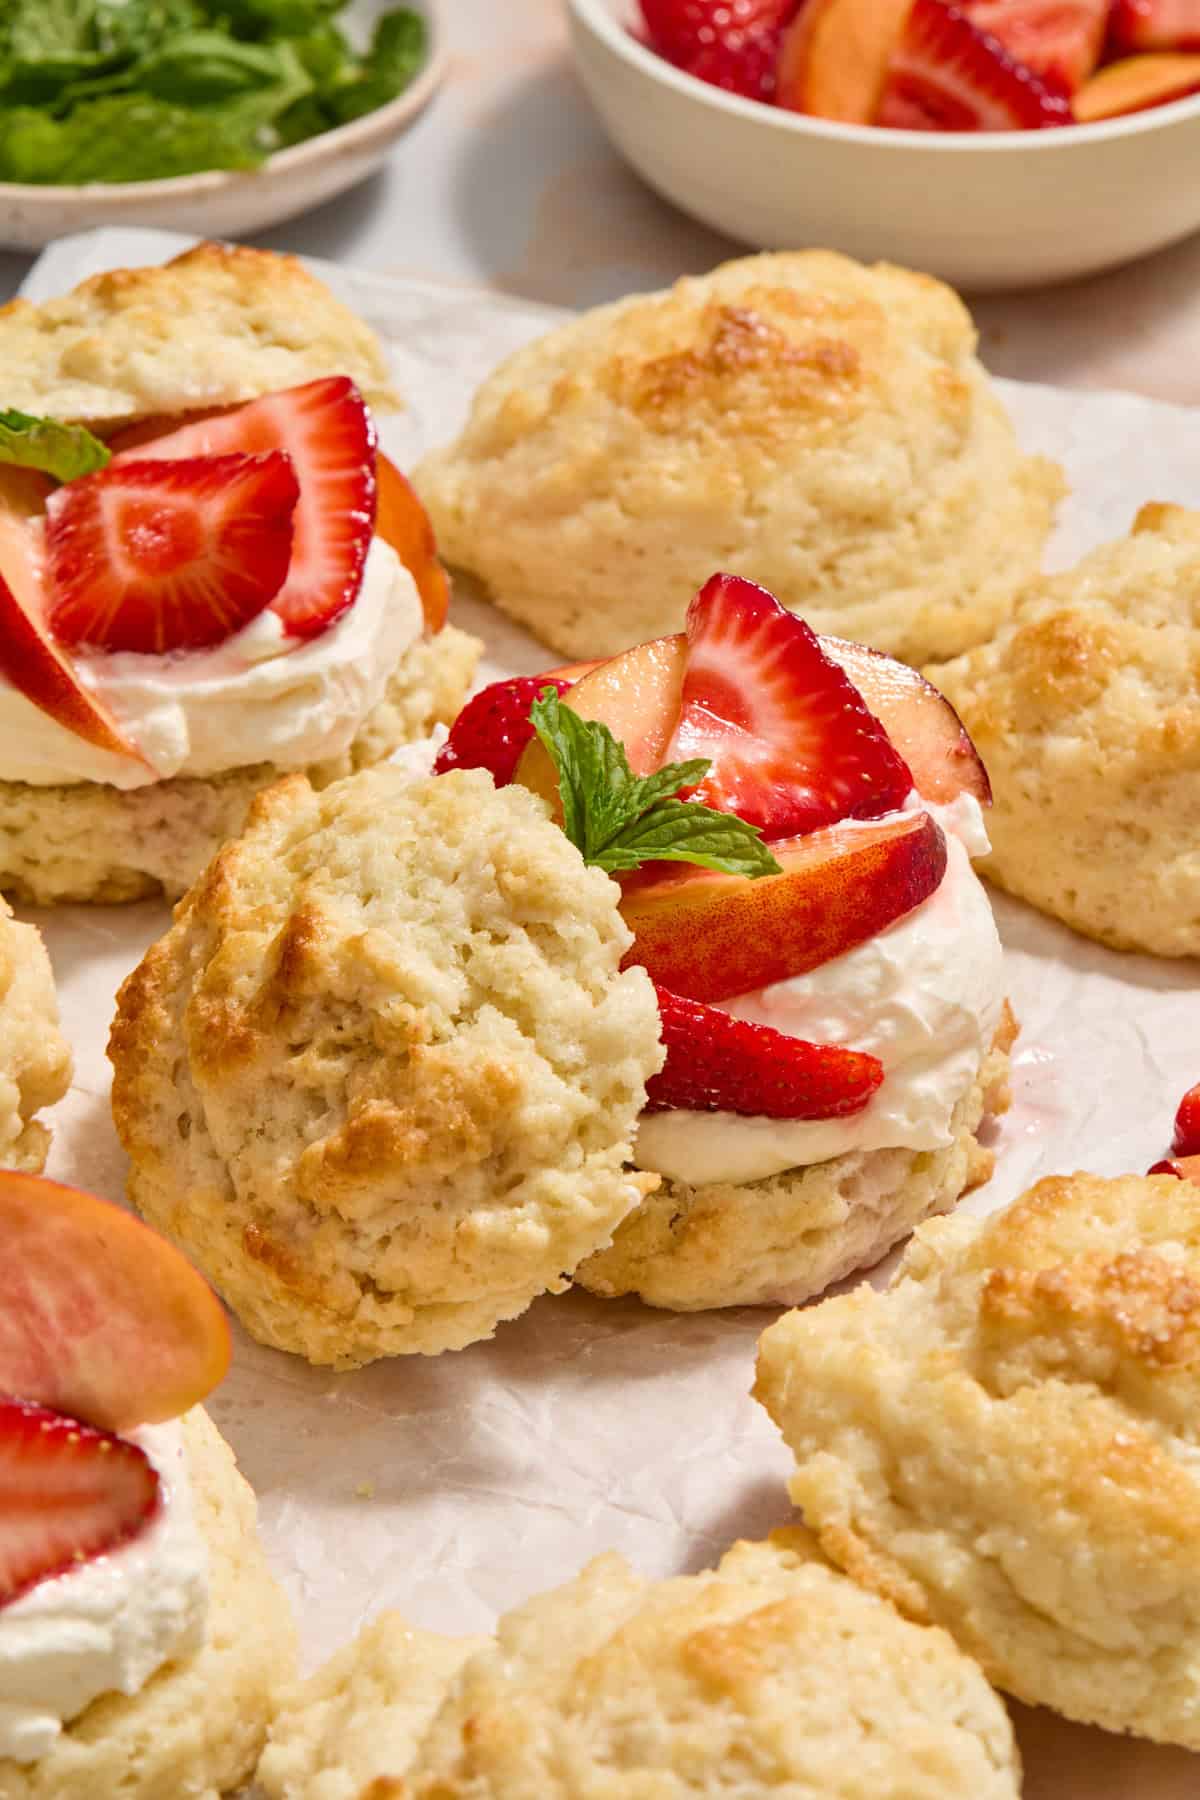 Peach and strawberry shortcakes layered with whipped cream and biscuit tops propped to the side of bottom half.